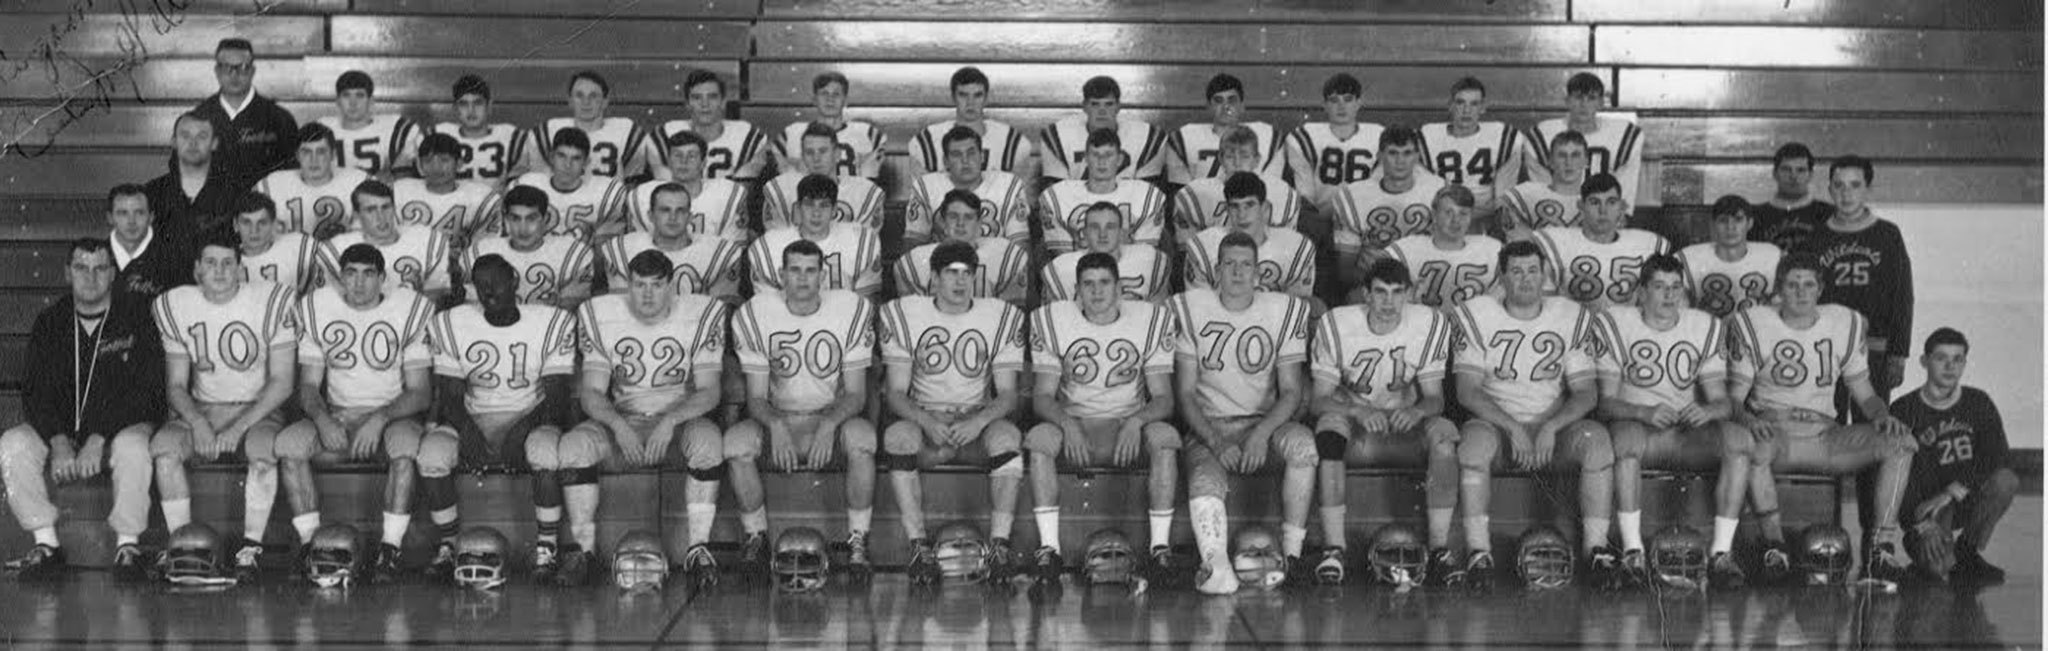 The Oak Harbor High School 1966 football team went undefeated. Head coach Will McGillivary is in the front row, far left. To his left are the starters: Jeff Short, Keith Hoffman, Mel Driver, Mike Tennis, Scott Hornung, Todd Oldenburg, Mel Elvebak, Dave Boon, Mike Nelson, Don Houck, Tim Rowand and Carl Peterson. (Submitted photo)